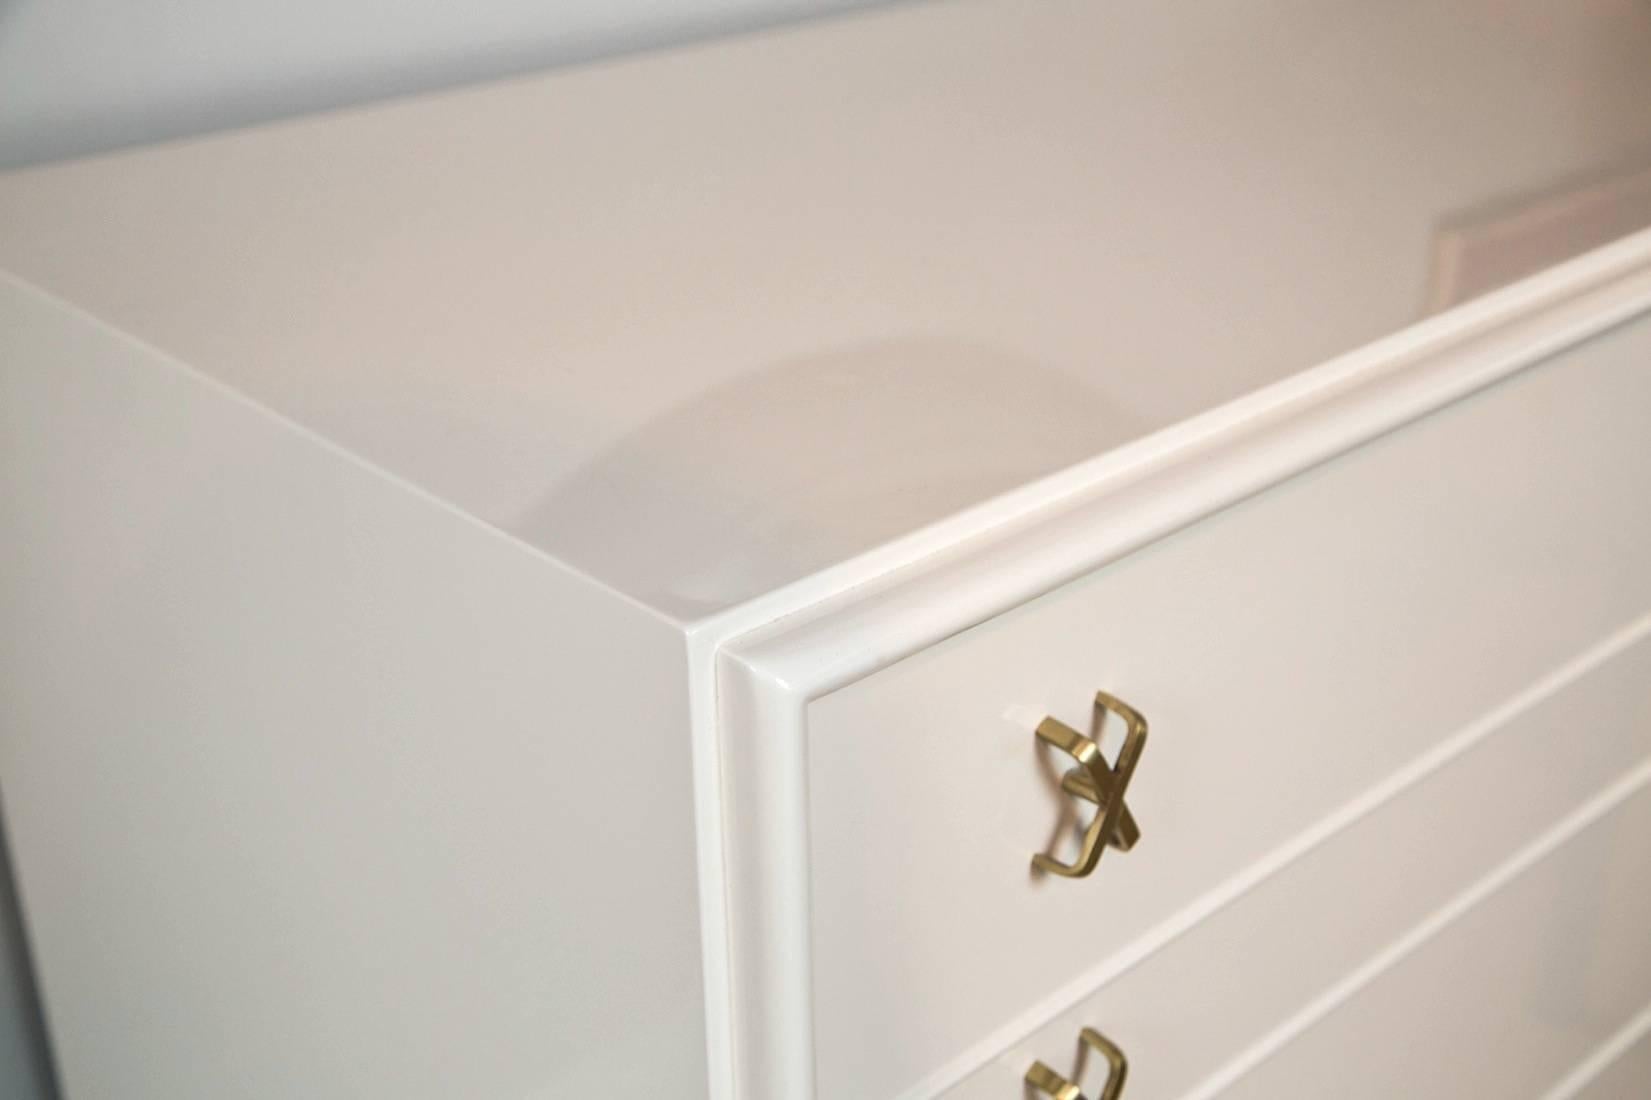 Paul Frankl Mid-Century dresser with brass X-pulls for John Stuart Inc and Johnson Furniture Co. Newly refinished in white lacquer. Original brass X-pulls retain original satin brass finish.